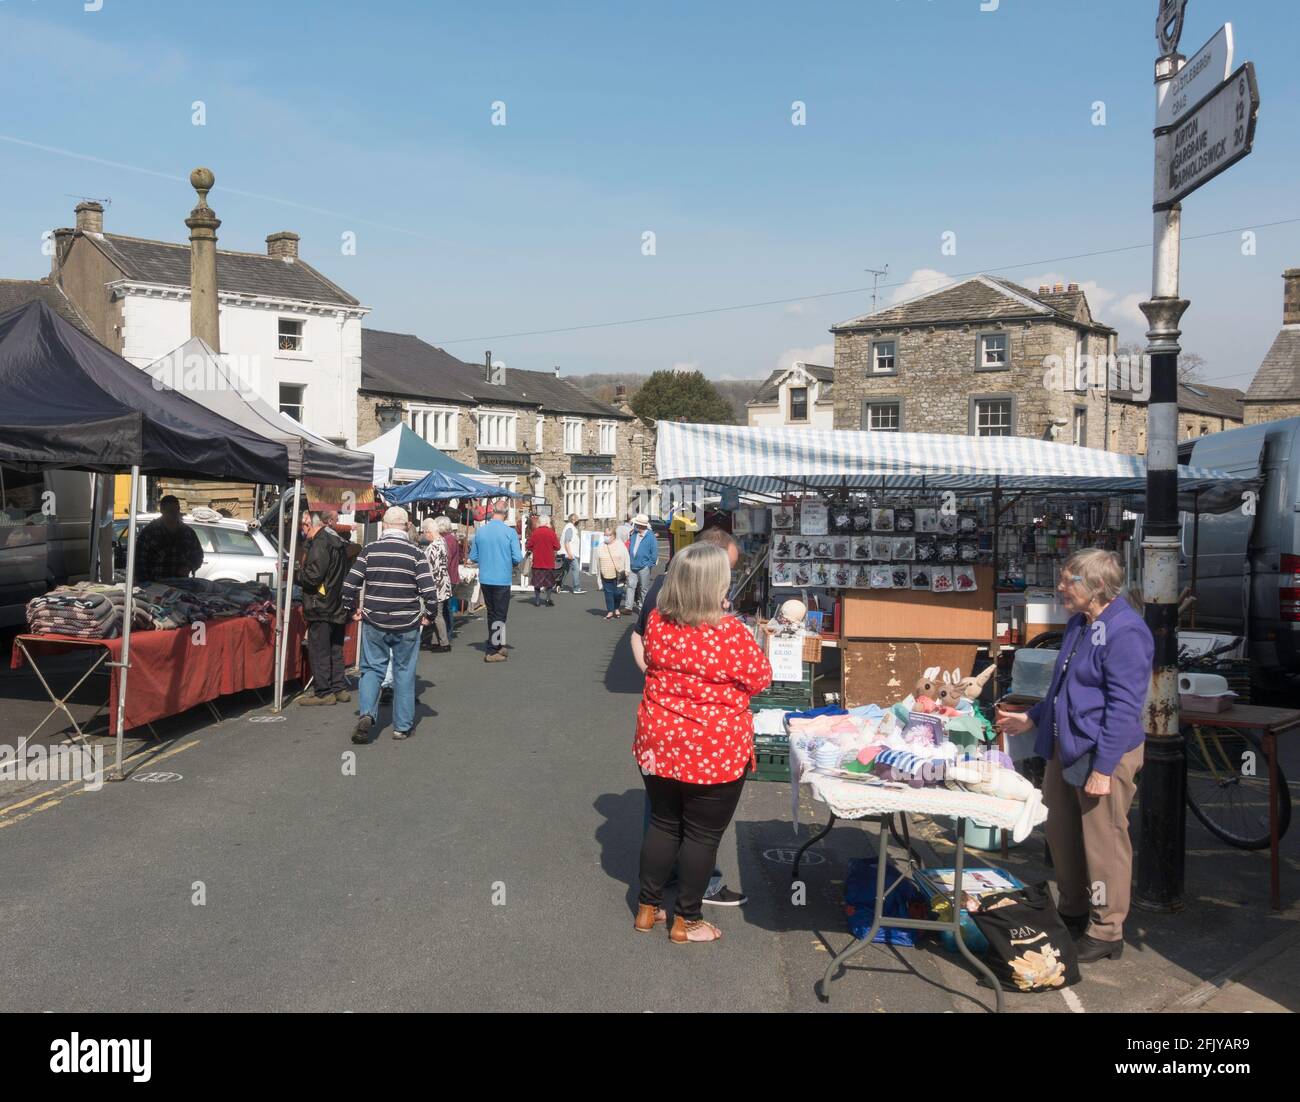 Shoppers in the the outdoor street market in Settle, Yorkshire, England, UK Stock Photo